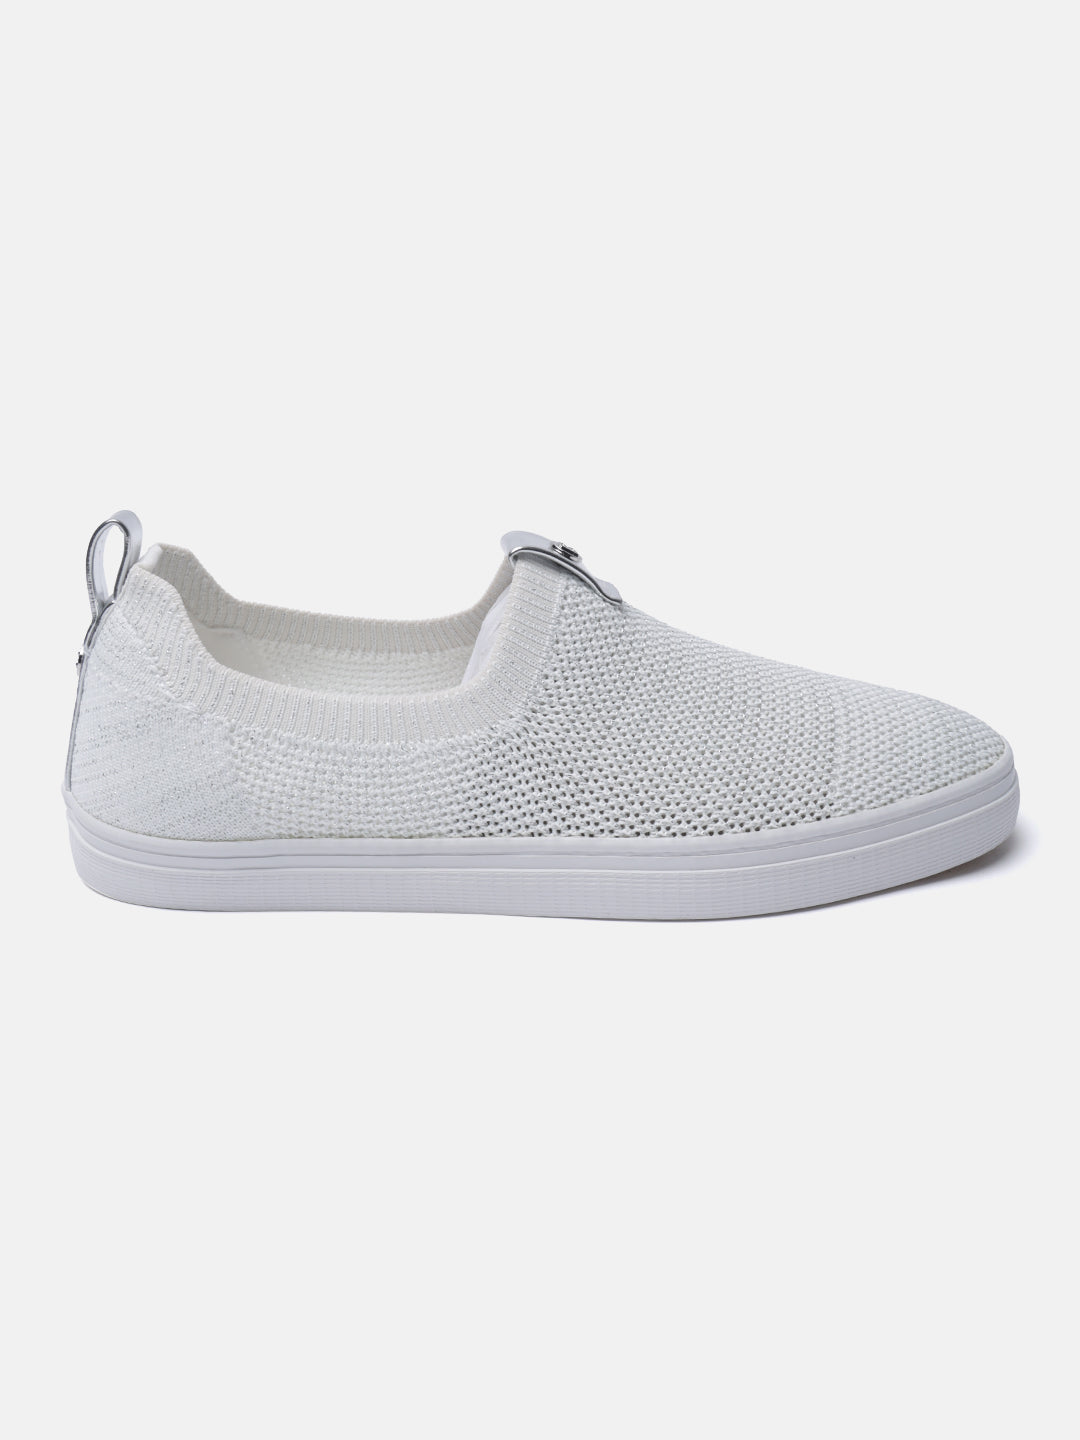 Lali White & Silver Casual Loafers